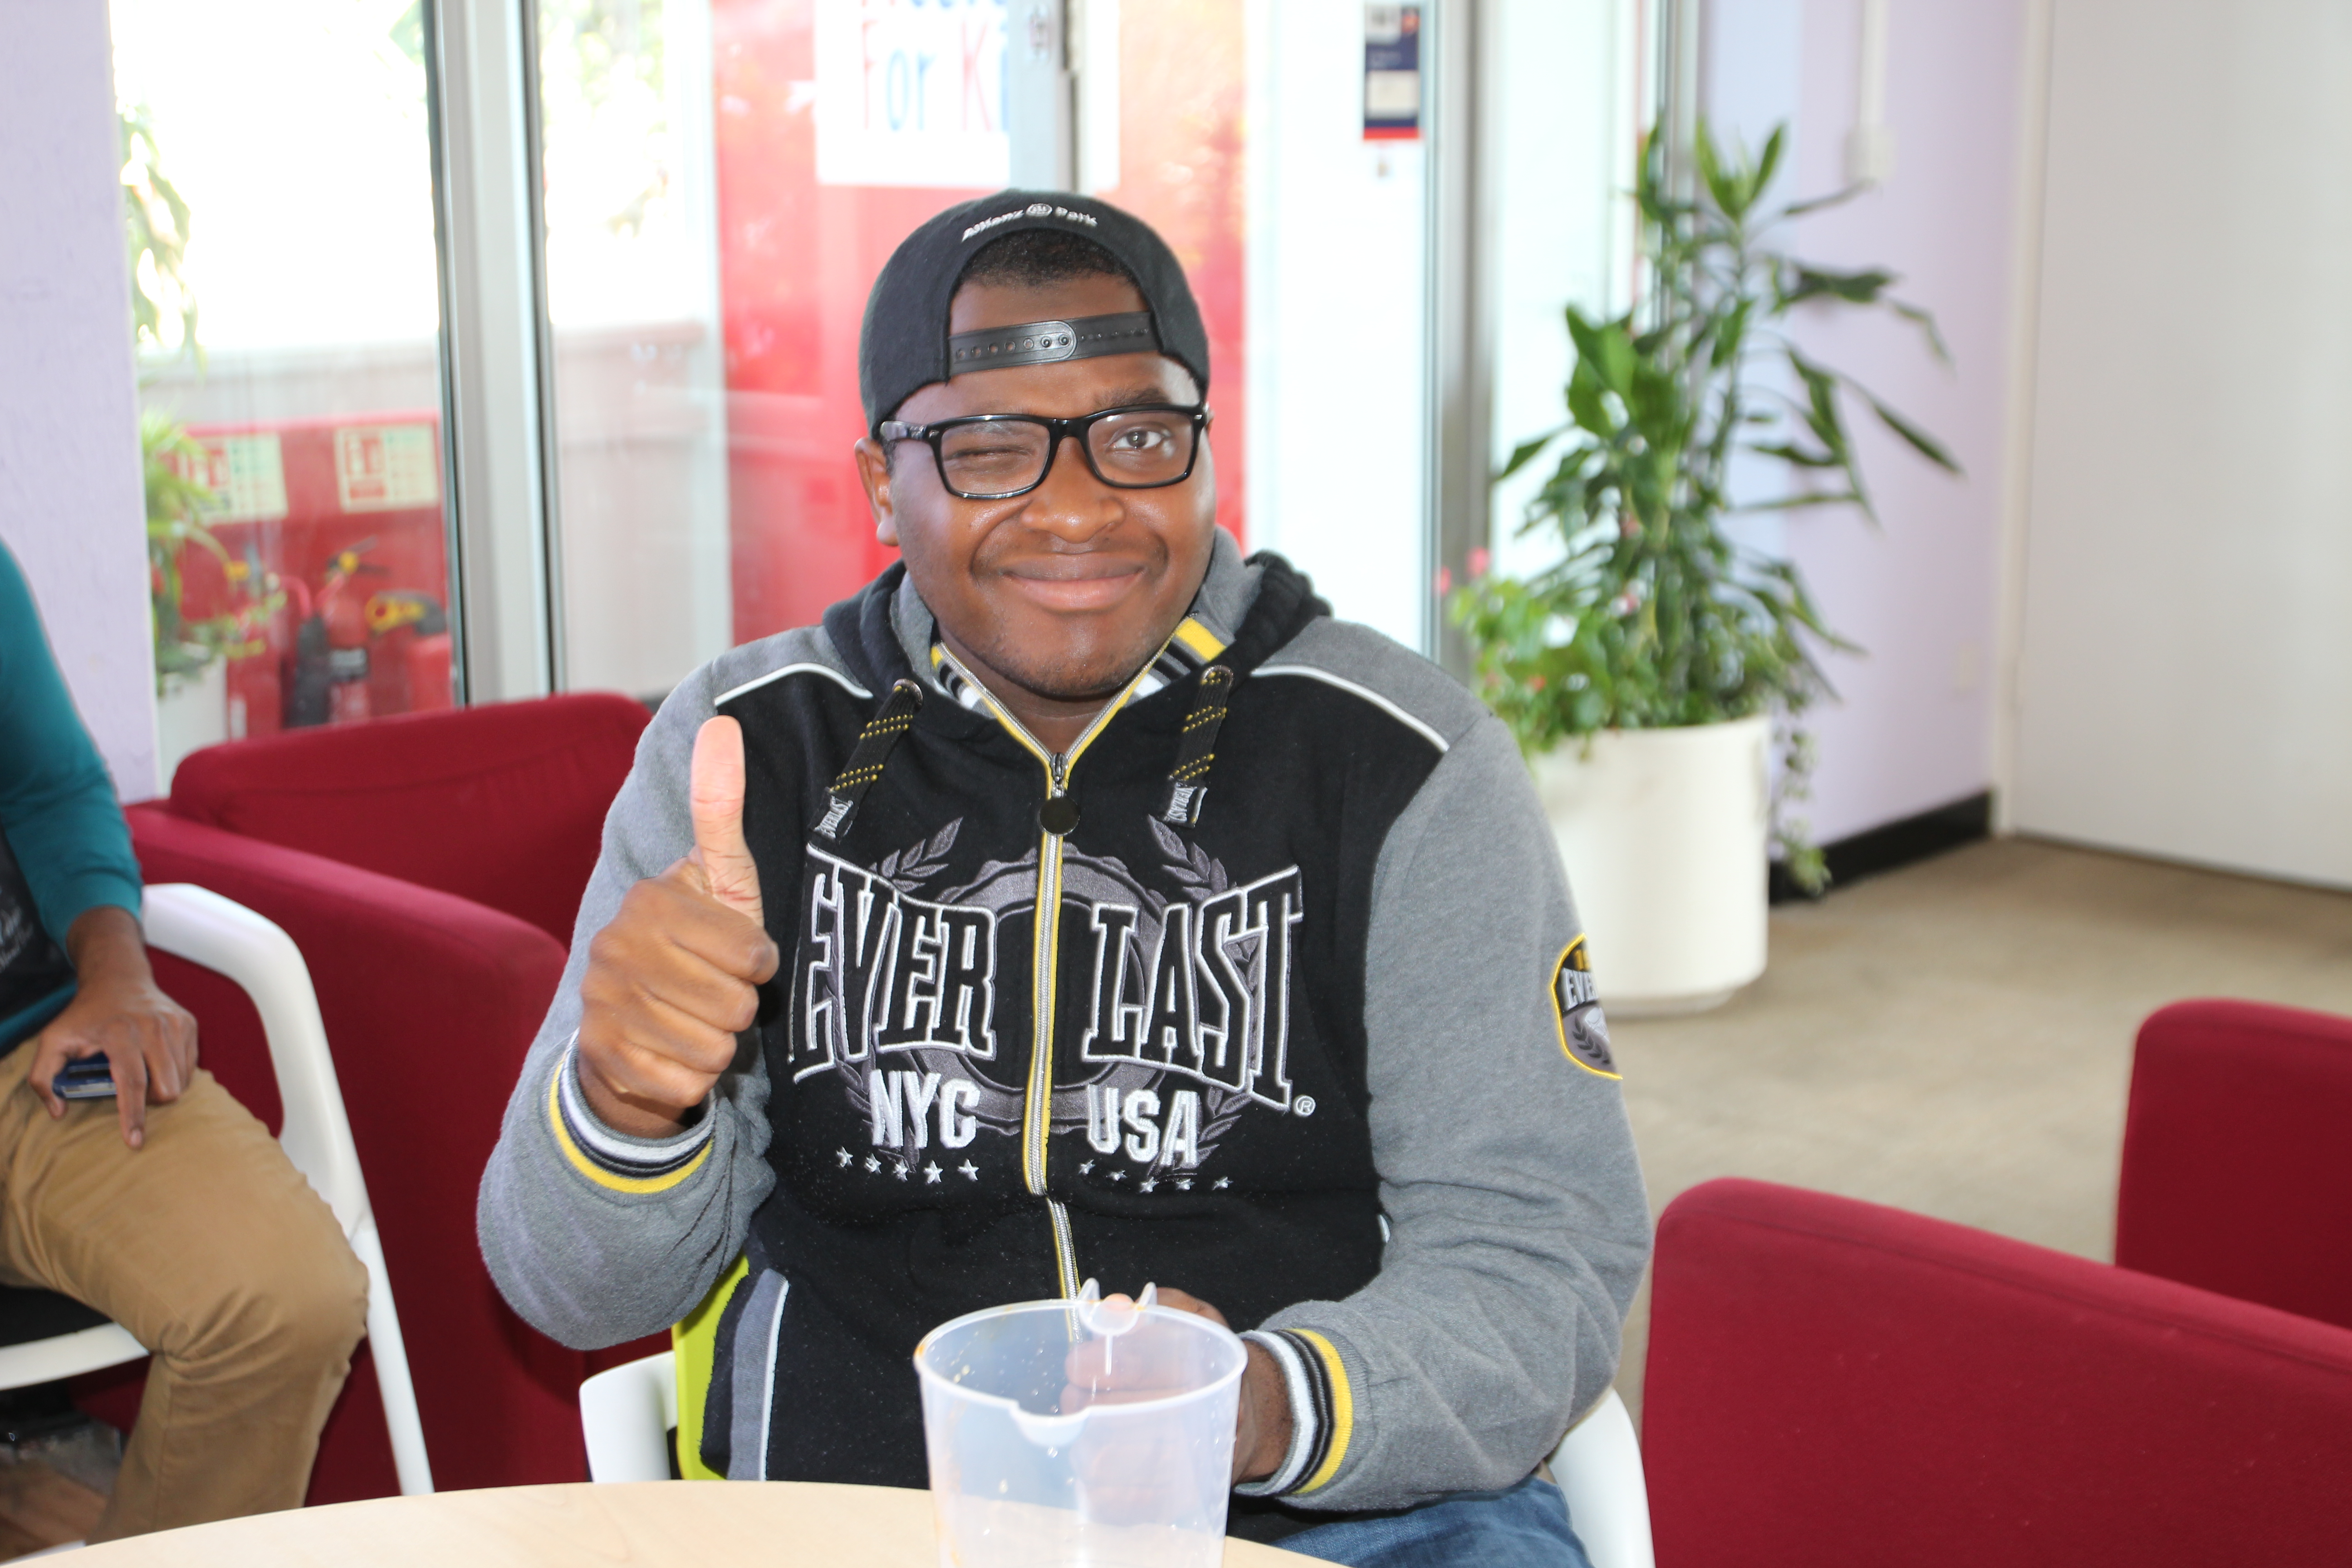 Young man giving a thumbs up and smiling